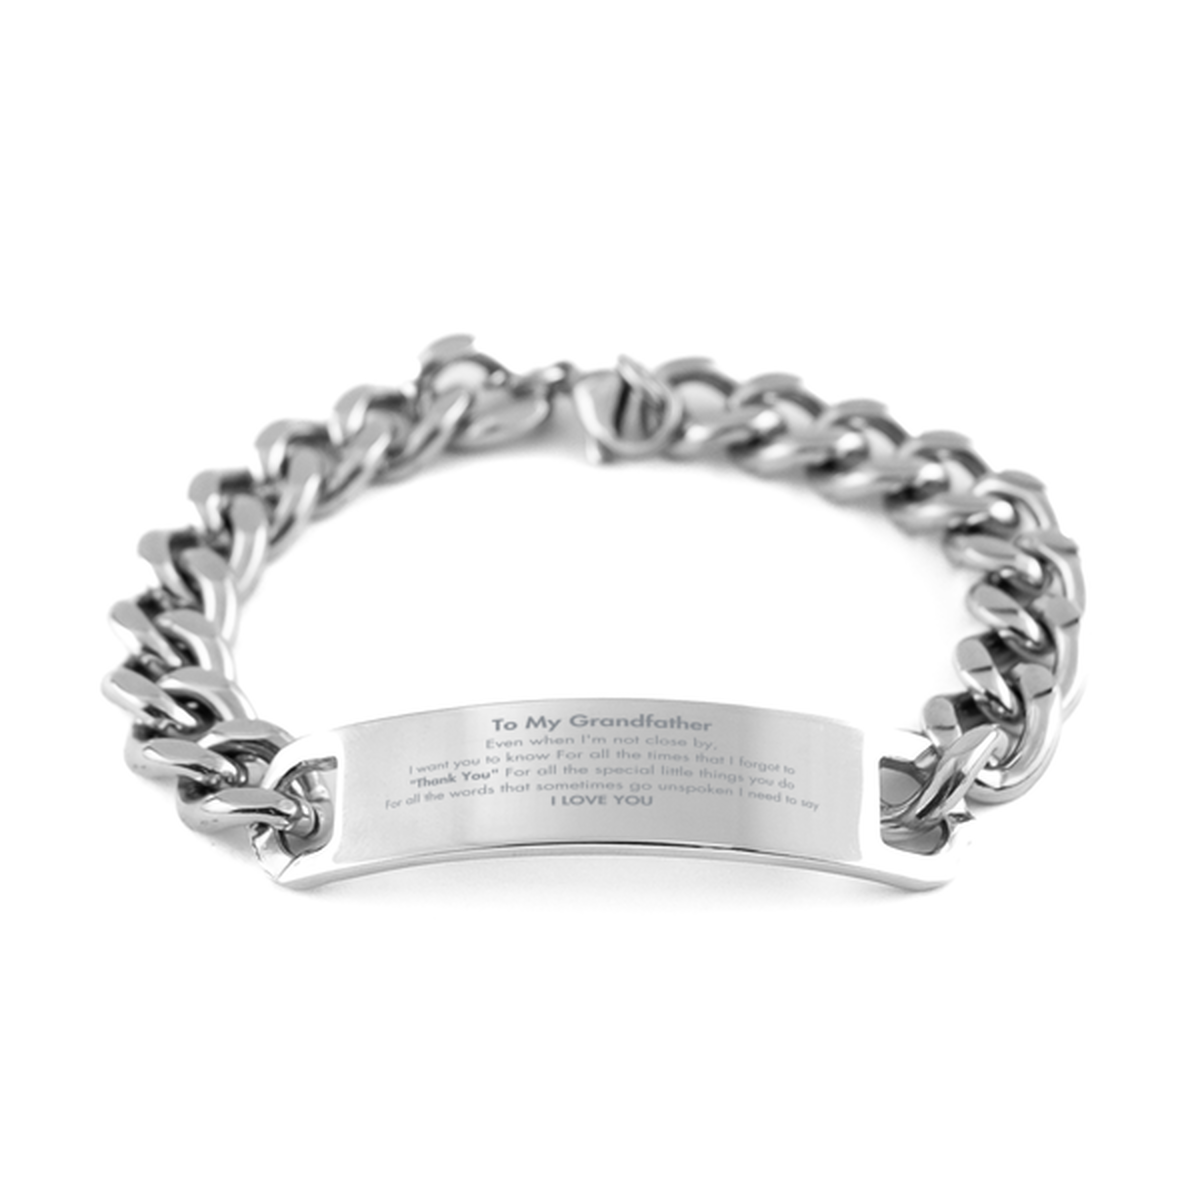 Thank You Gifts for Grandfather, Keepsake Cuban Chain Stainless Steel Bracelet Gifts for Grandfather Birthday Mother's day Father's Day Grandfather For all the words That sometimes go unspoken I need to say I LOVE YOU